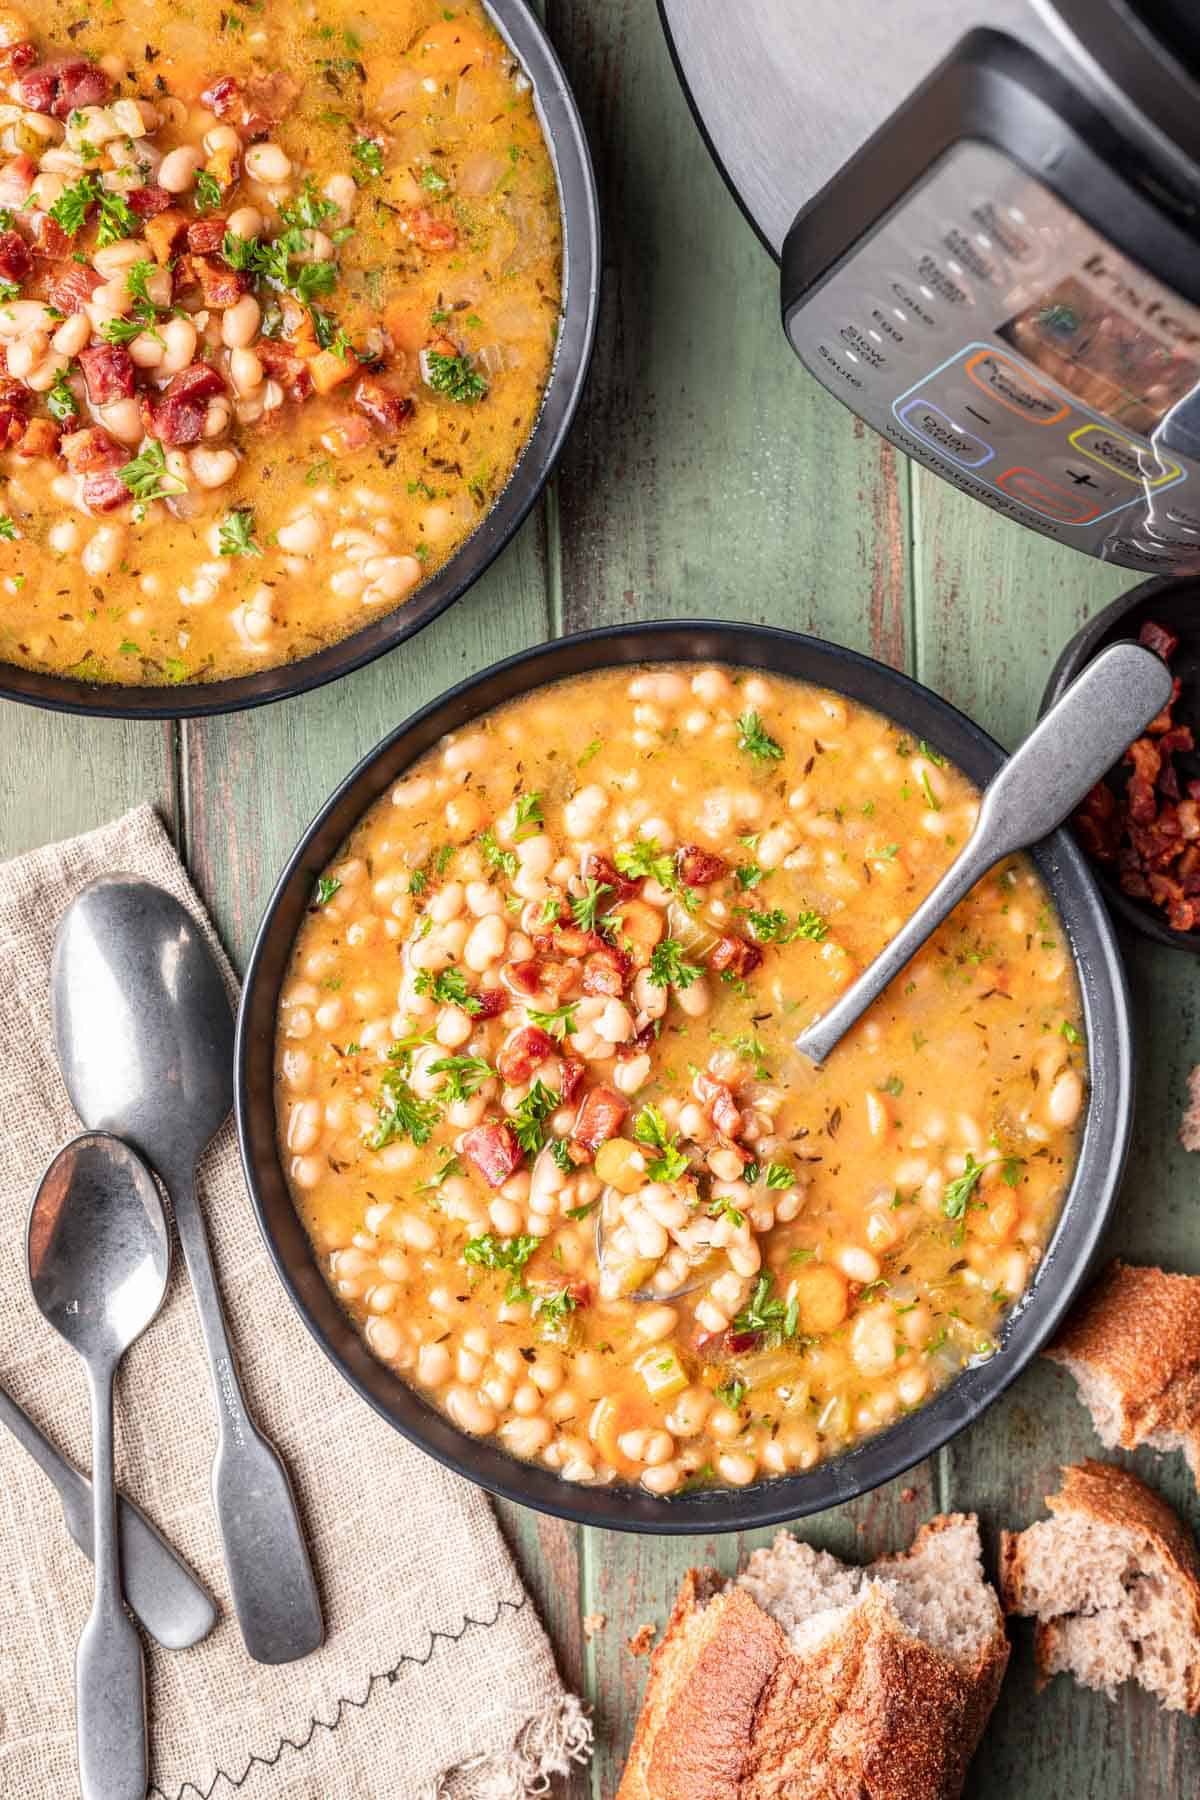 Instant pot navy bean soup in bowls with soup spoons.